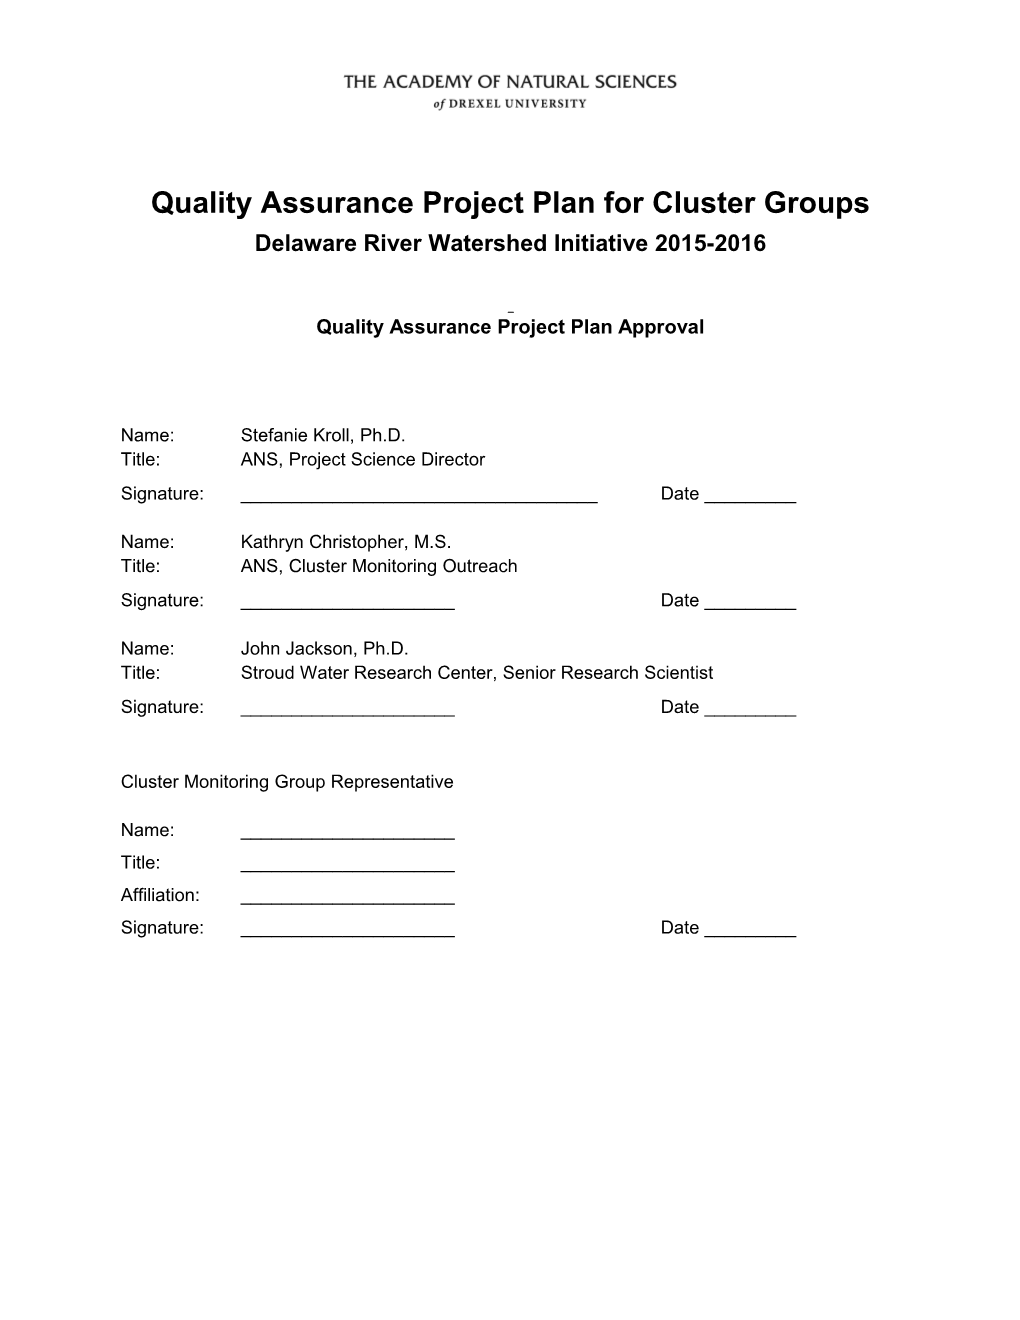 Quality Assurance Project Plan for Cluster Groups